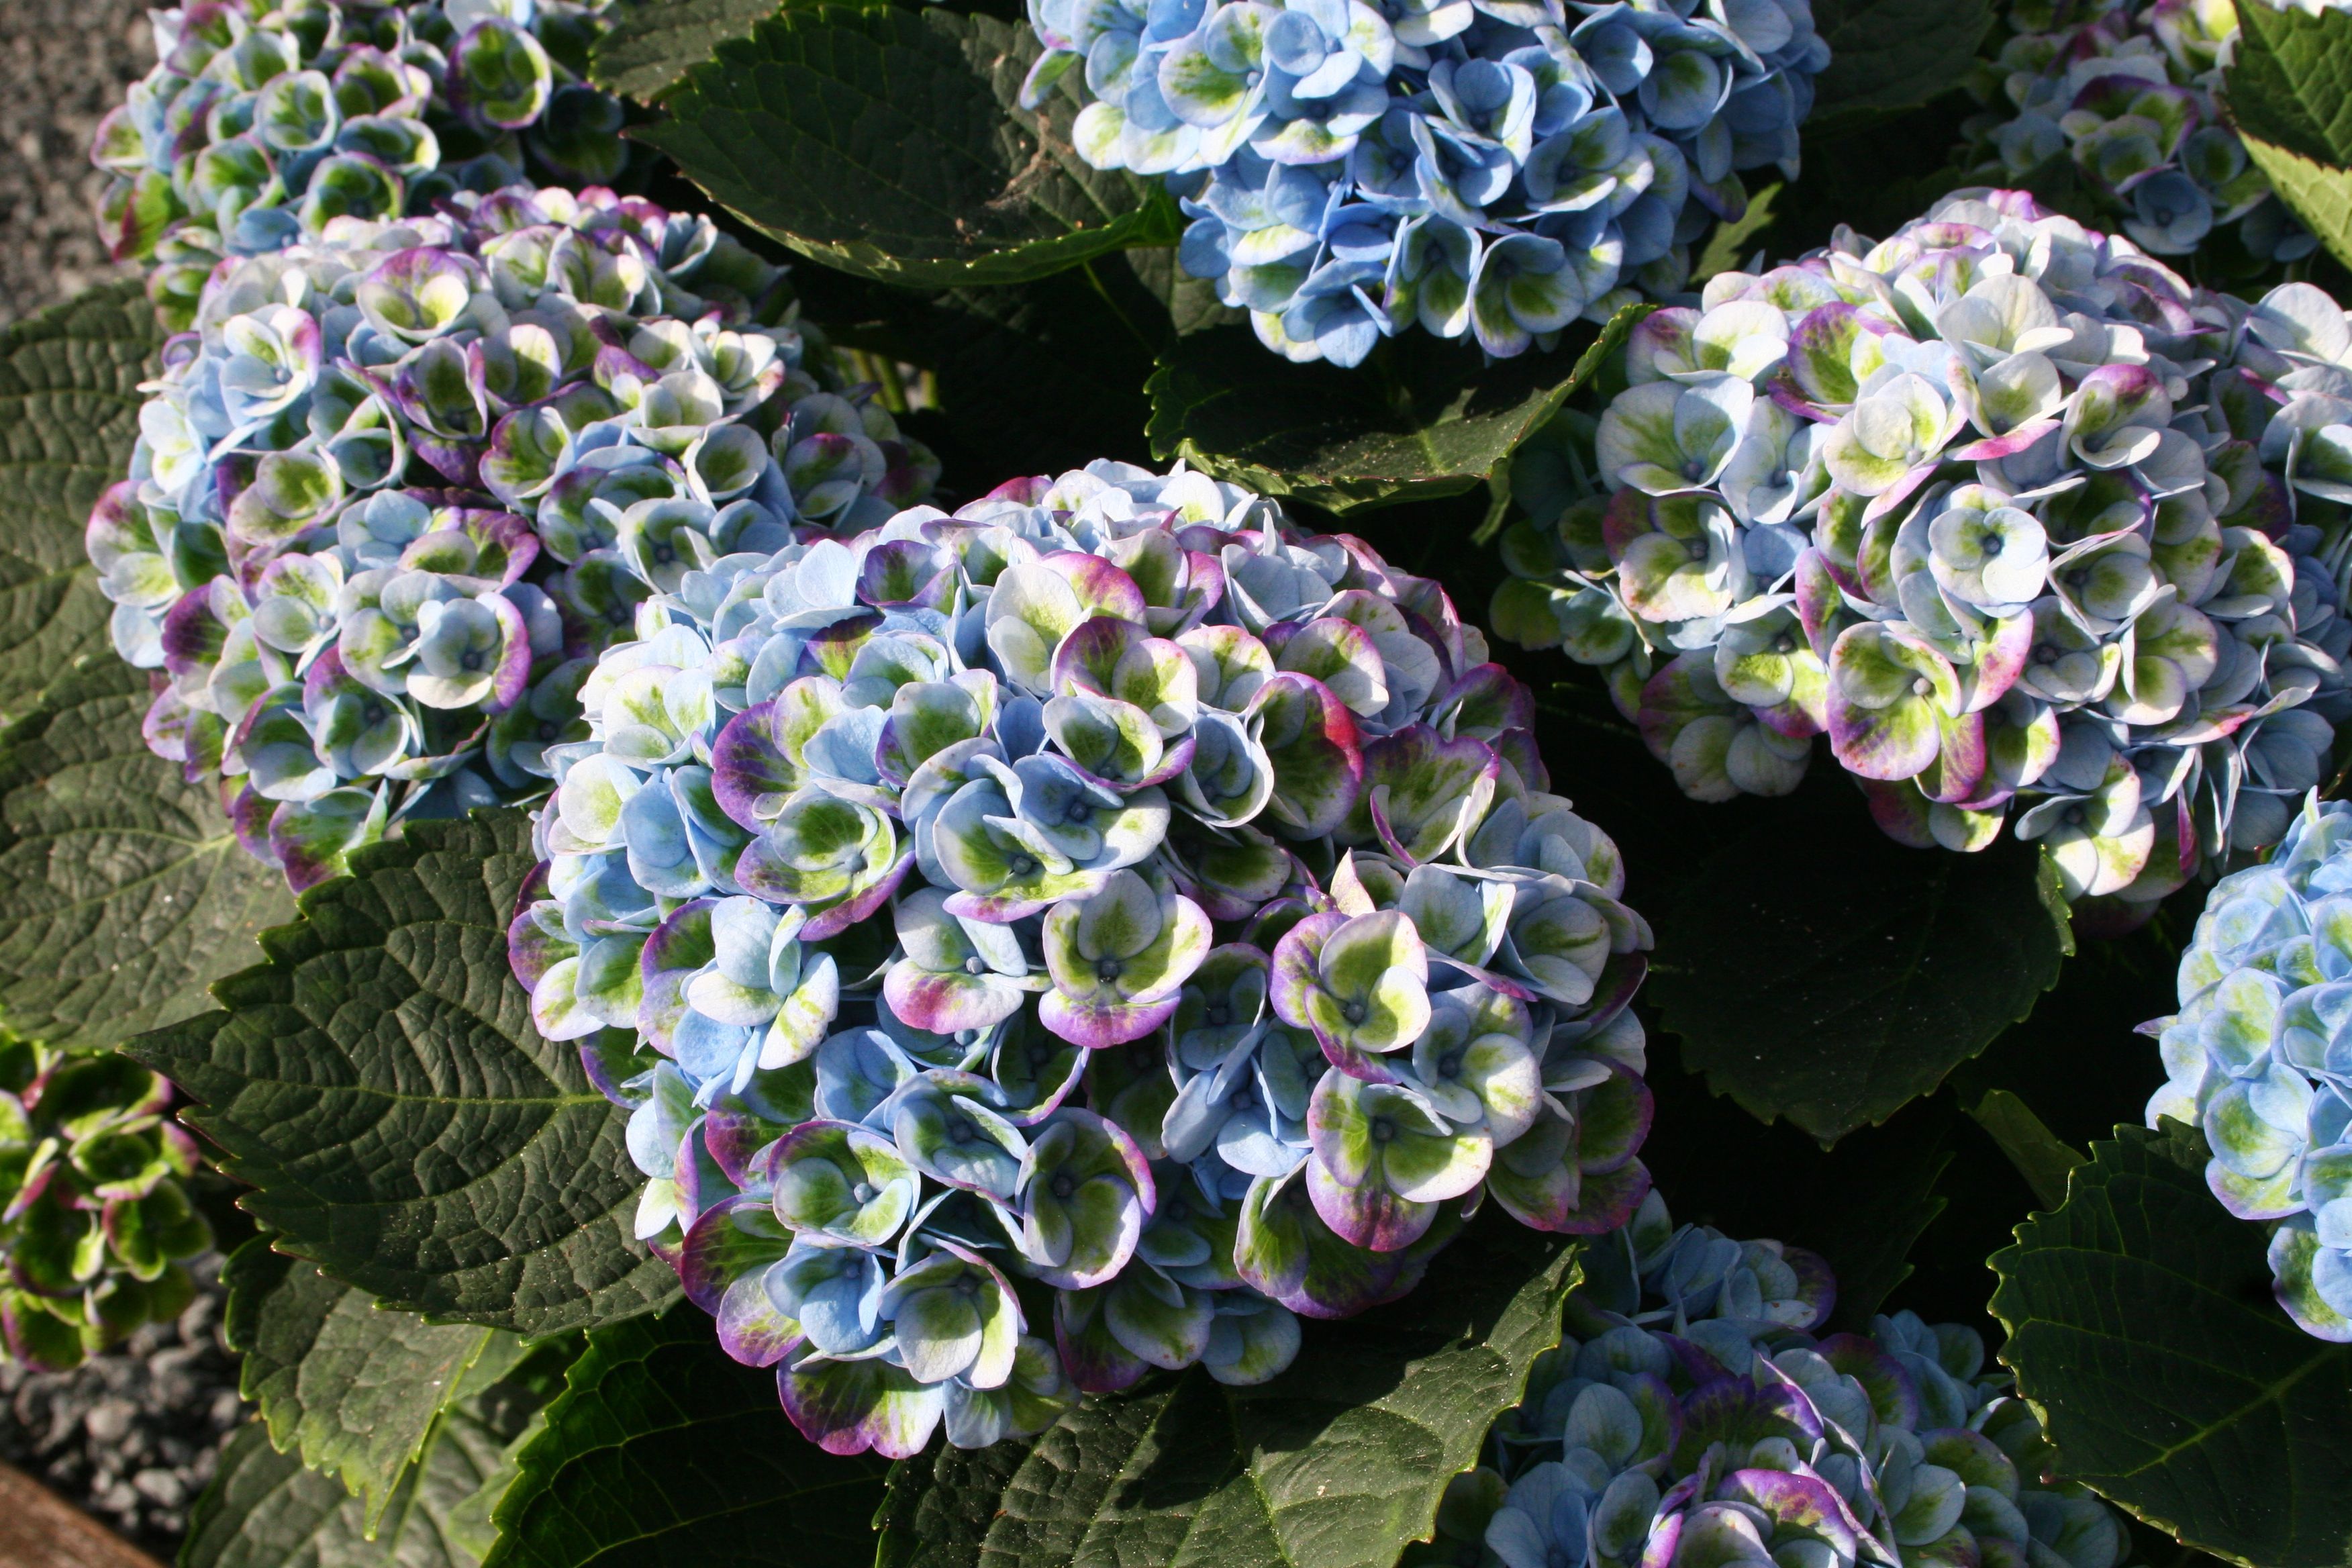 images/plants/hydrangea/hyd-magical-everlasting-revolution/hyd-magical-everlasting-revolution-0012.jpg